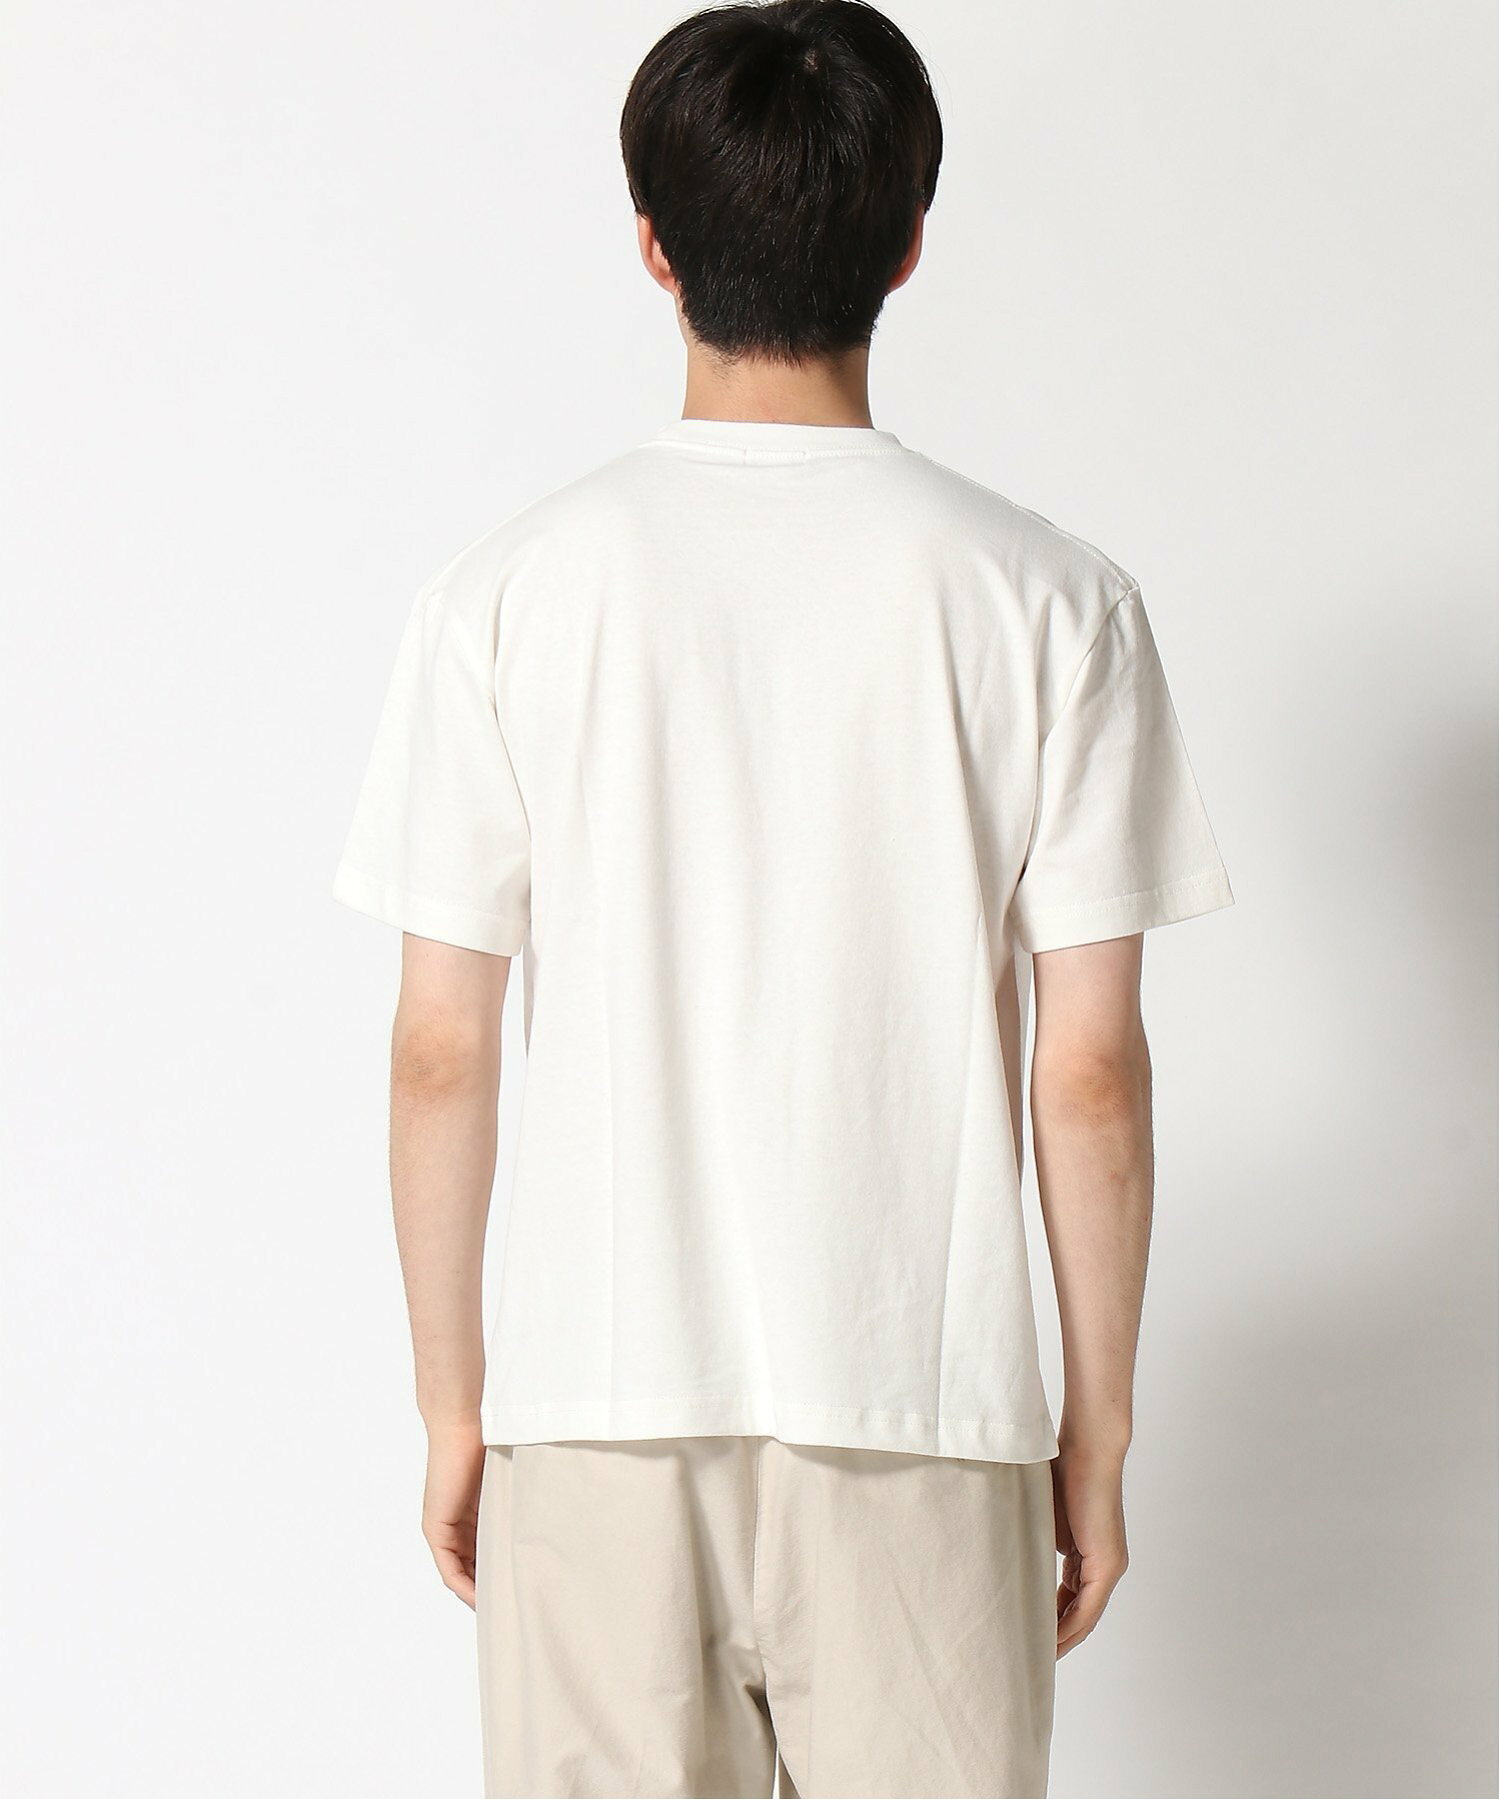 POLO BCS/oversize print Tee　24SS　母の日　ギフト　ユニセックス　